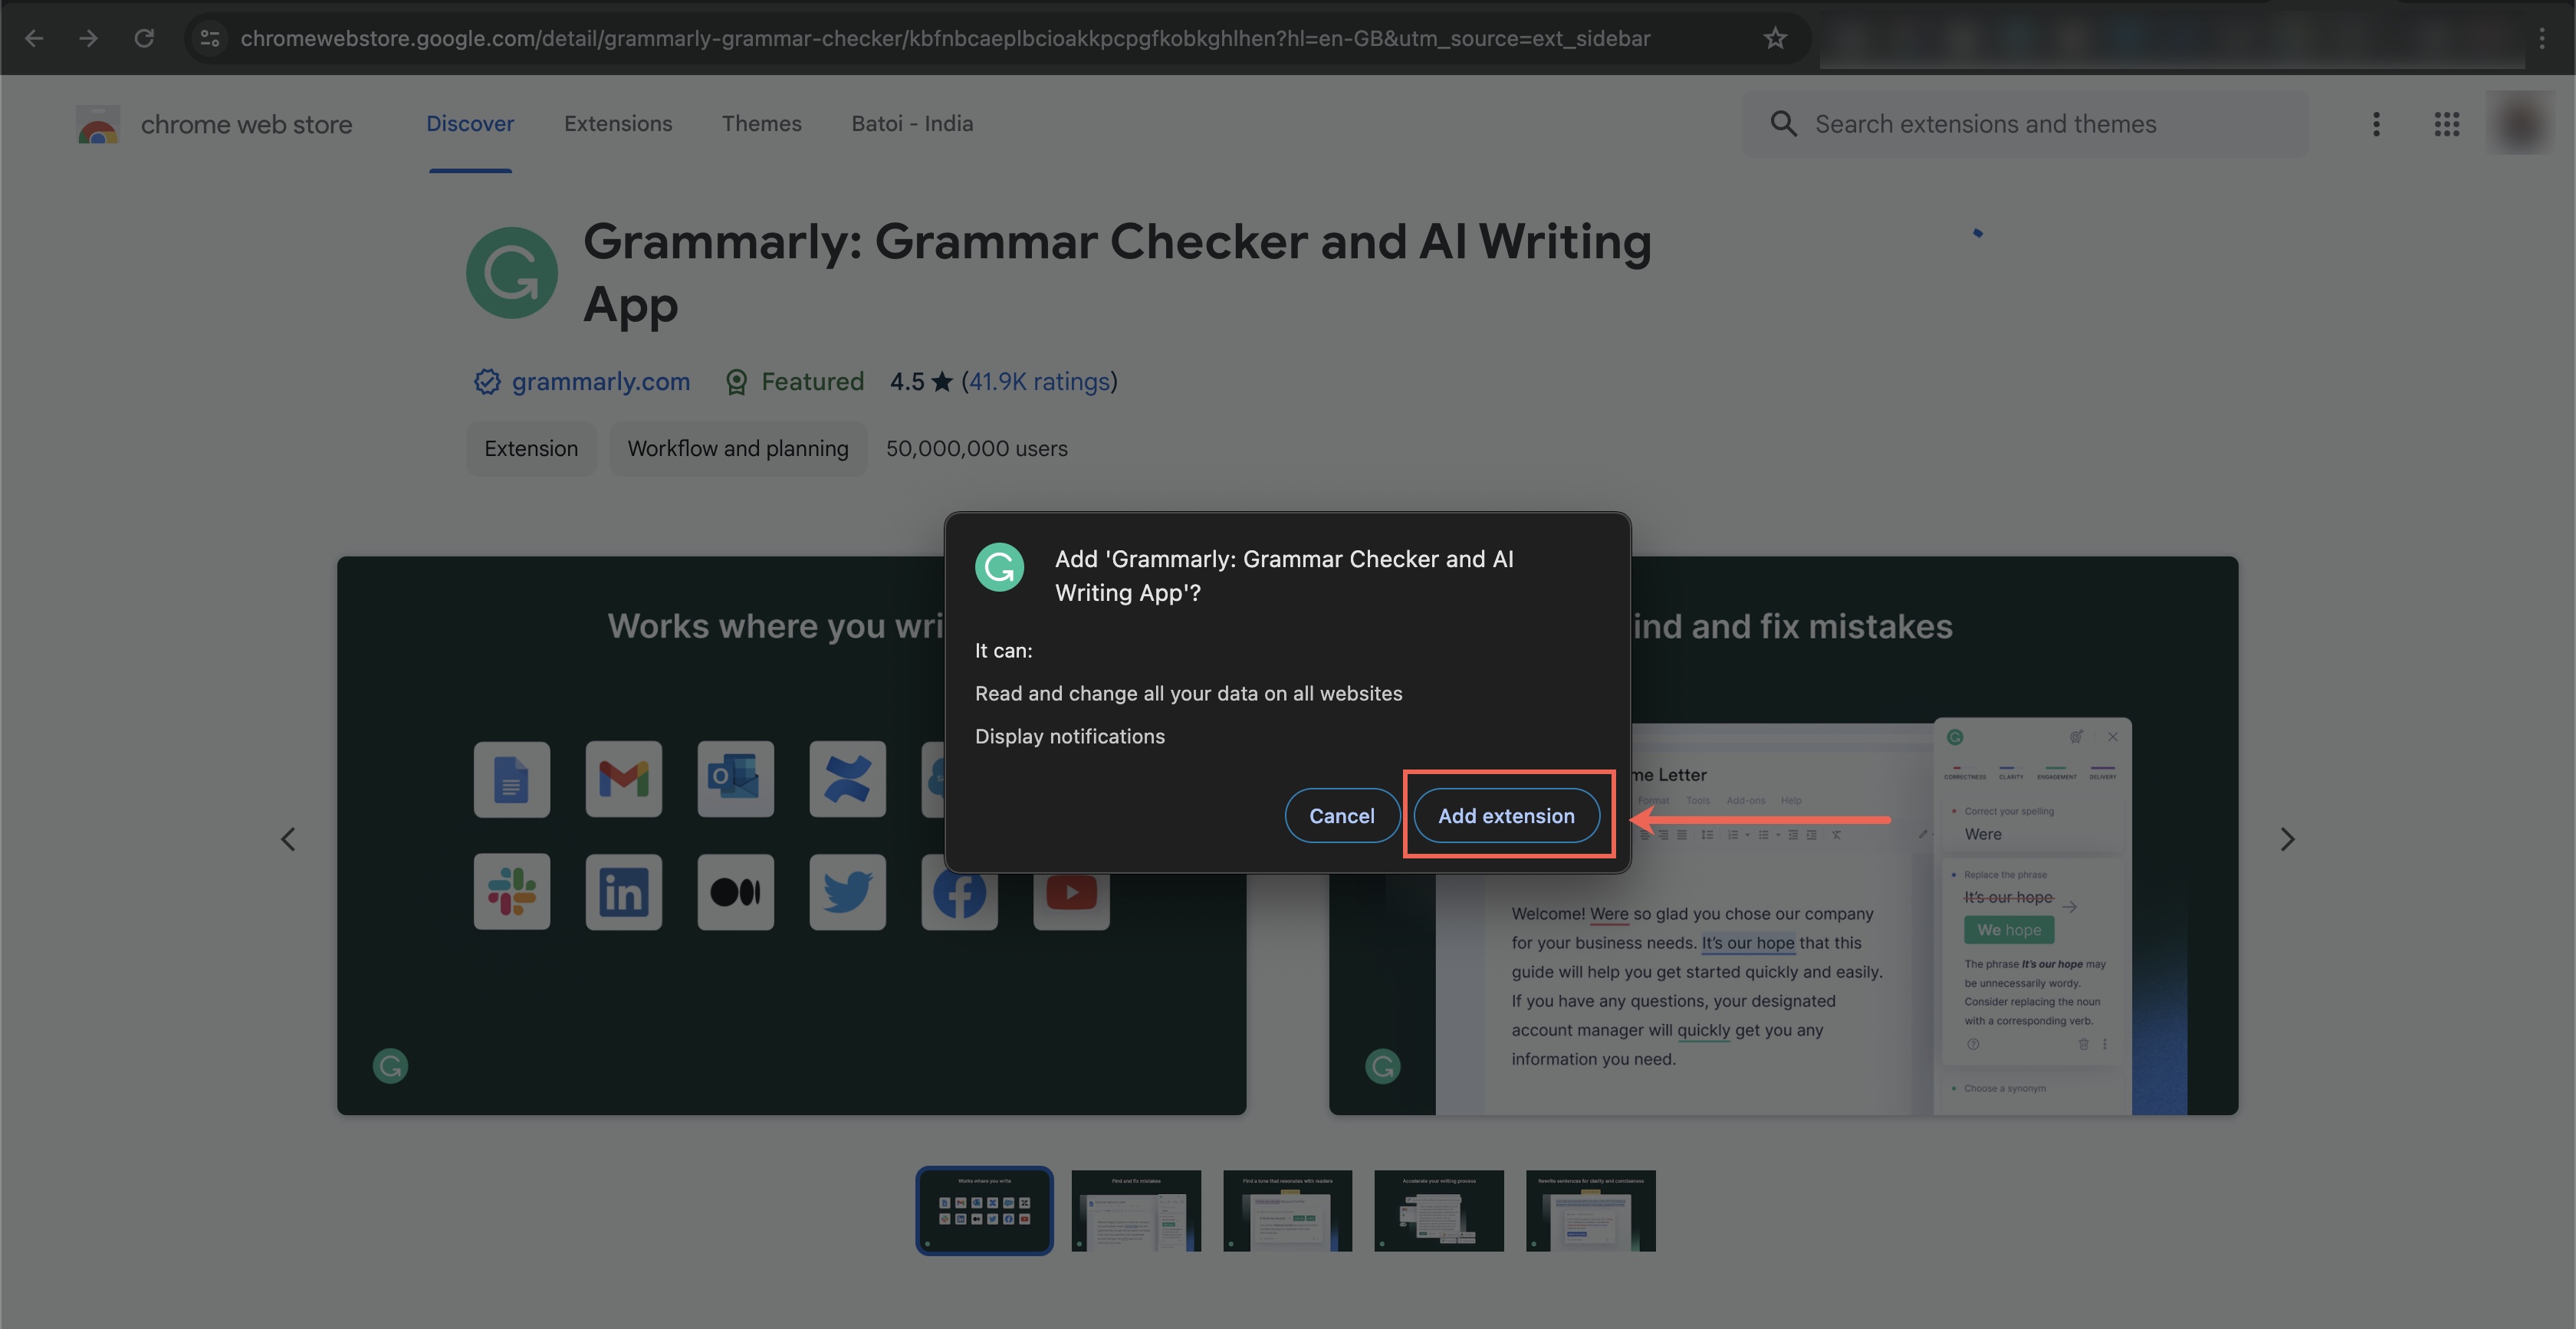 Figure 5: Chrome Web Store Grammarly Extension Permission Pop-up Screen